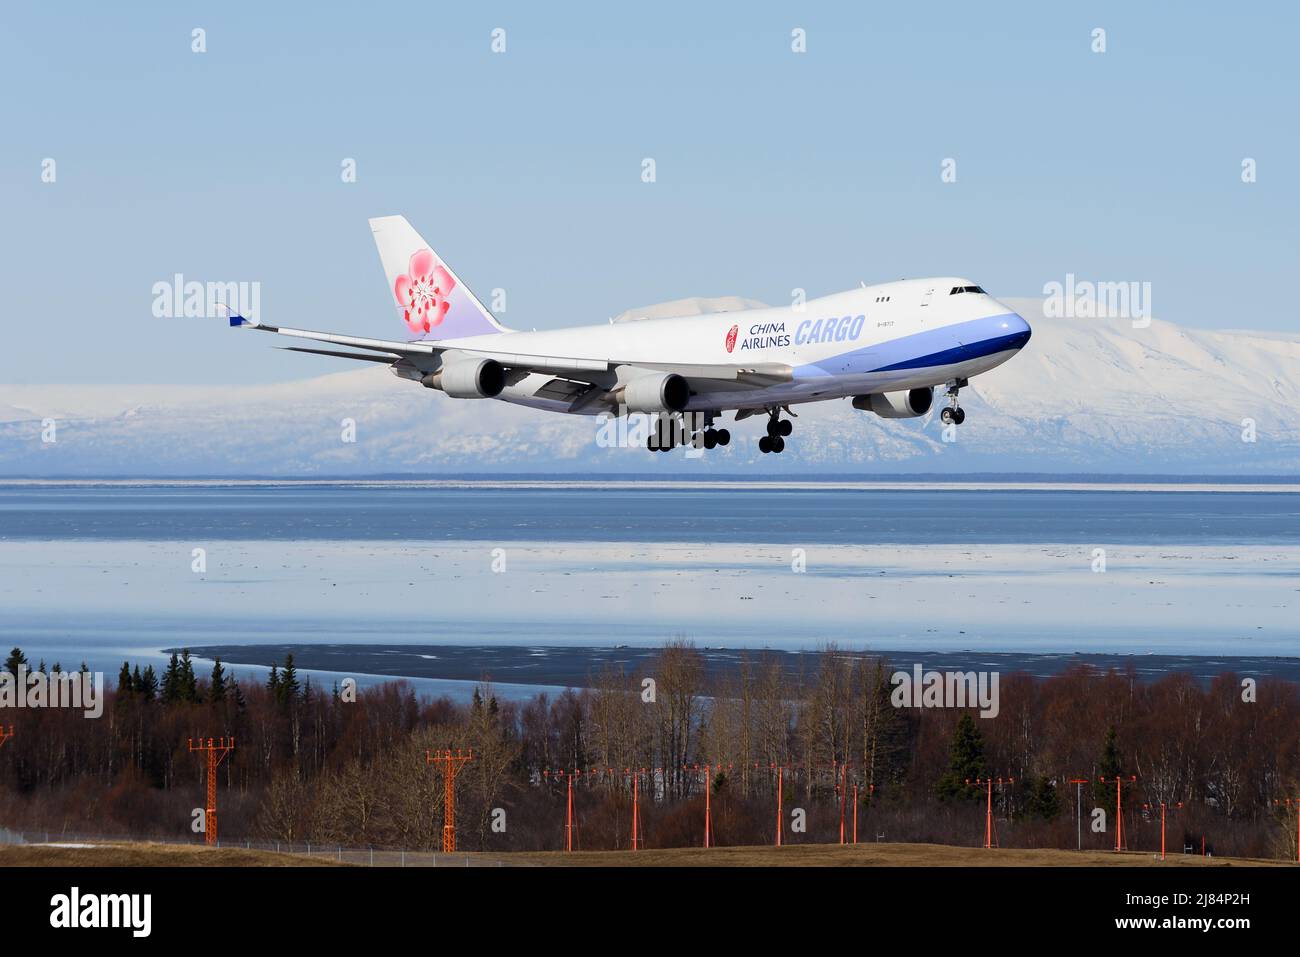 China Airlines Cargo Boeing 747 freighter aircraft landing. Large cargo airplane 747-400F. Plane 747F arrival in Anchorage Airport, Alaska, USA. Stock Photo